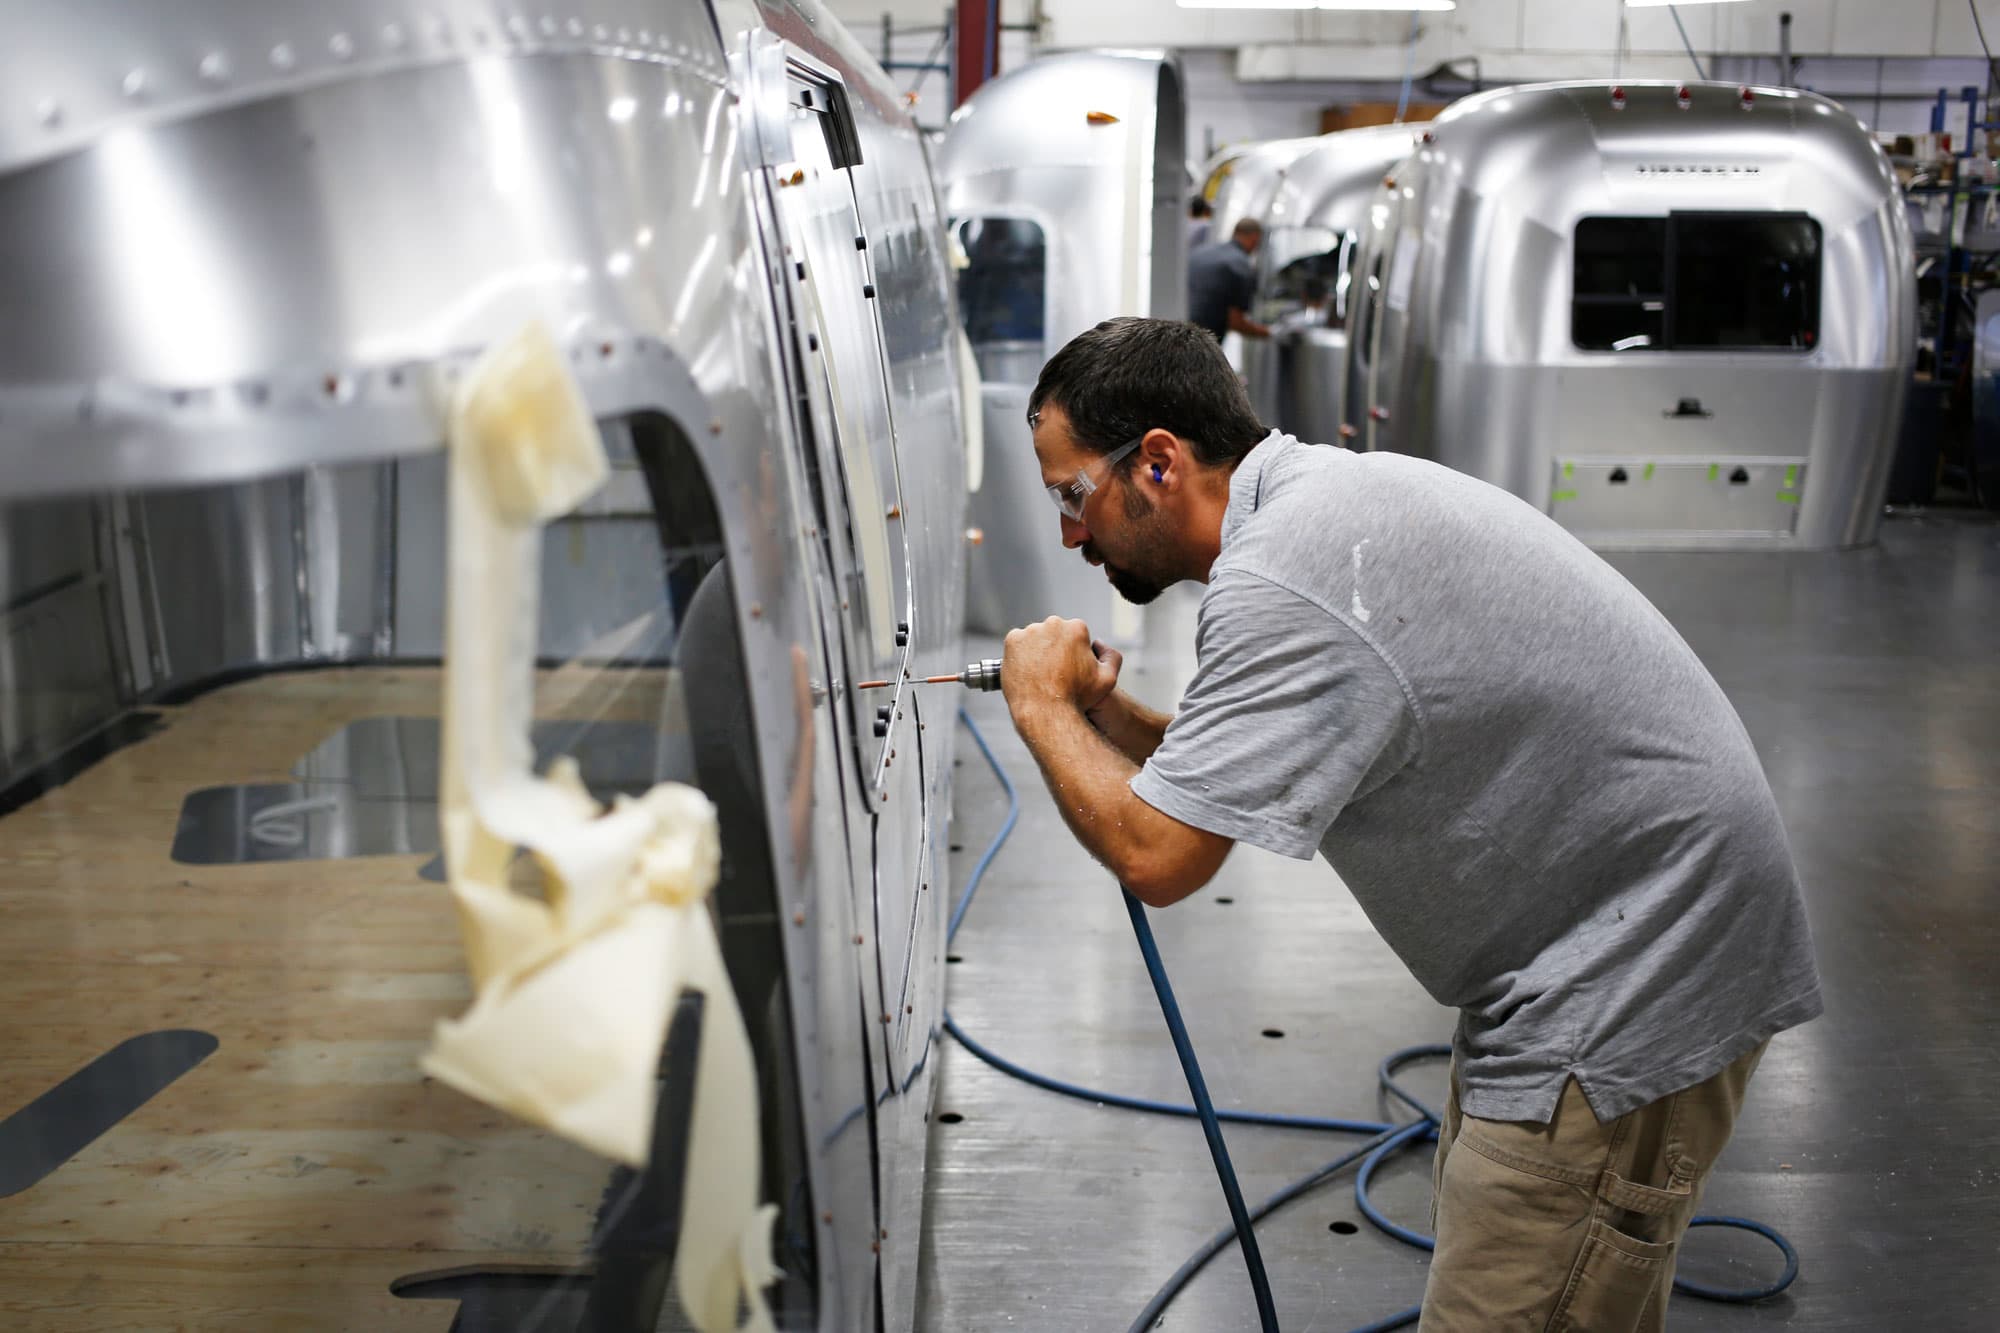 CEO of Airstream maker expects sizzling RV market to proceed put up pandemic